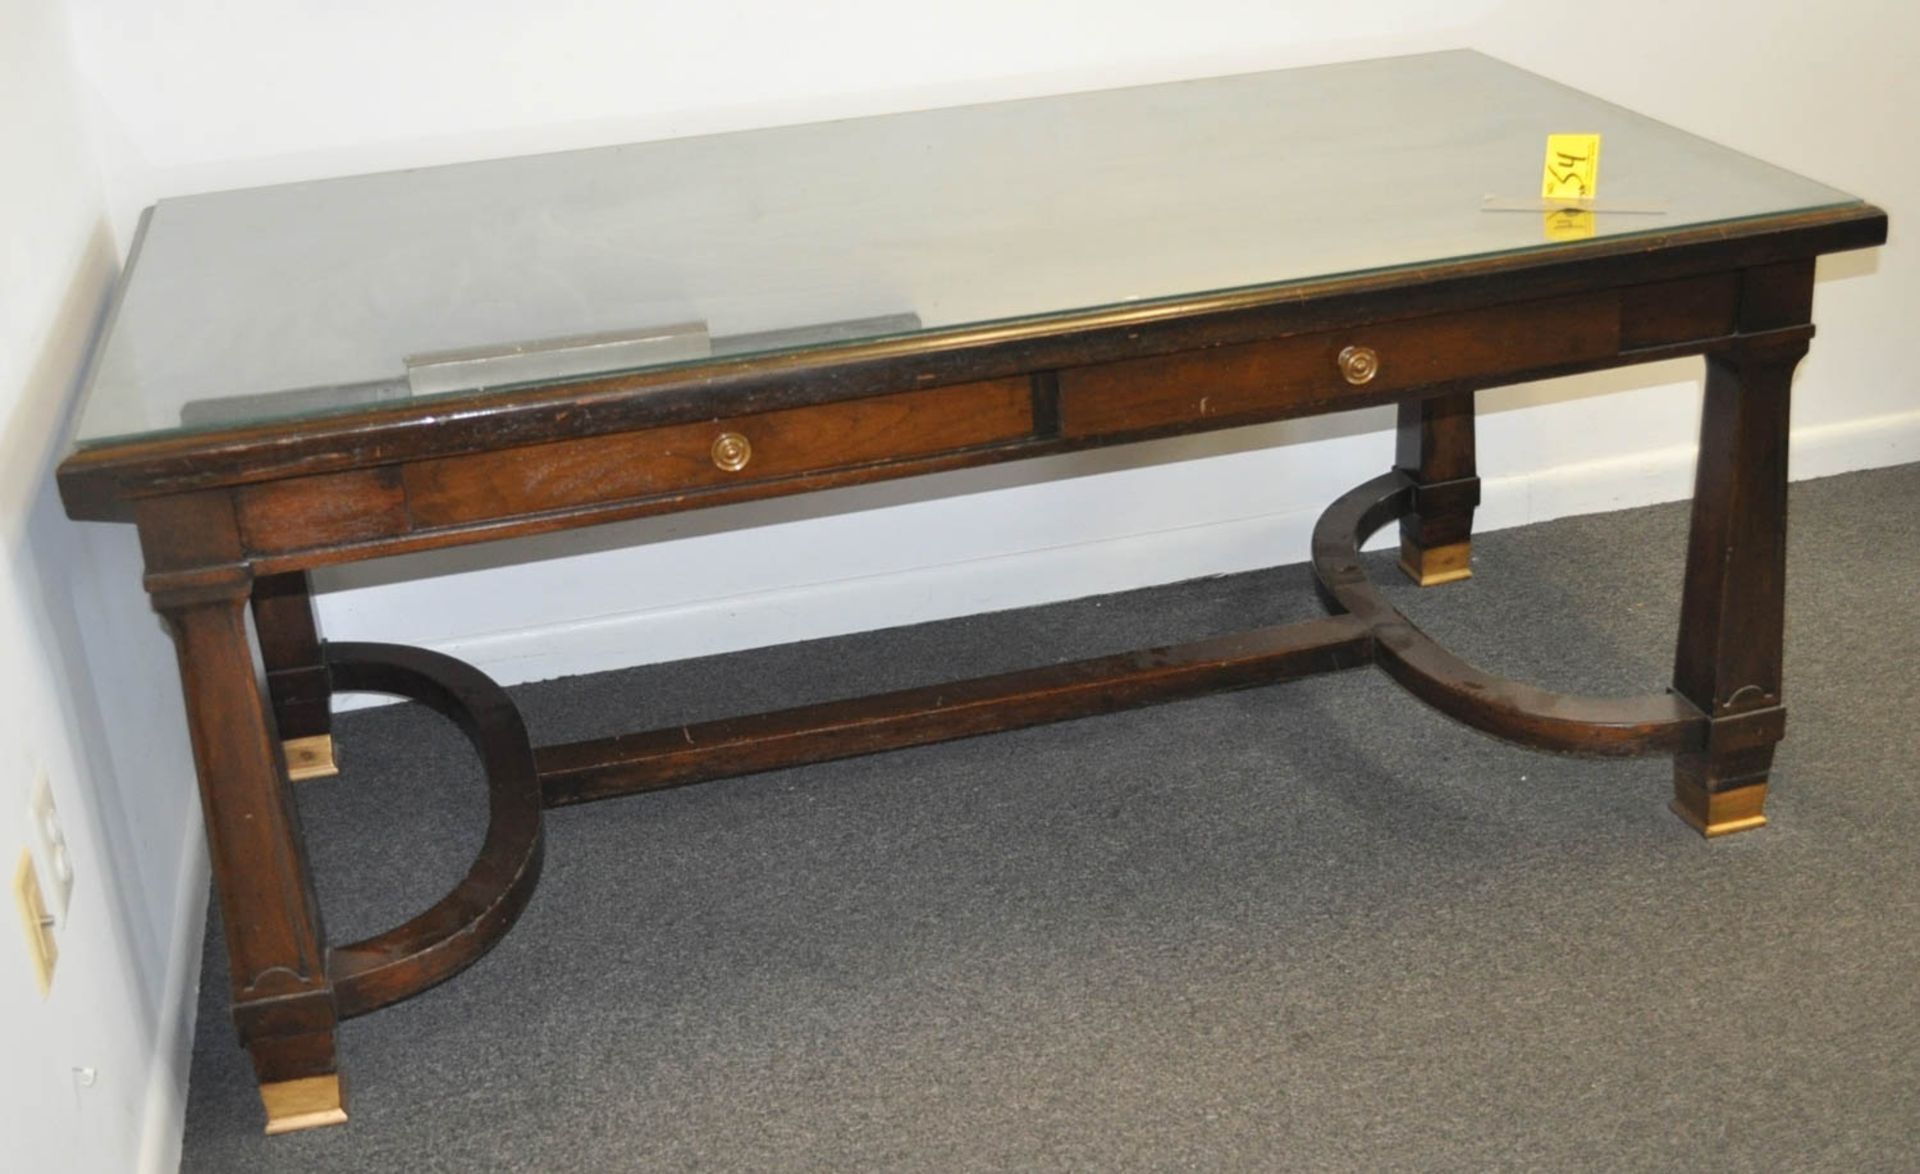 WOOD LINCOLN DESK WITH GLASS PROTECTIVE TOP - Image 2 of 3